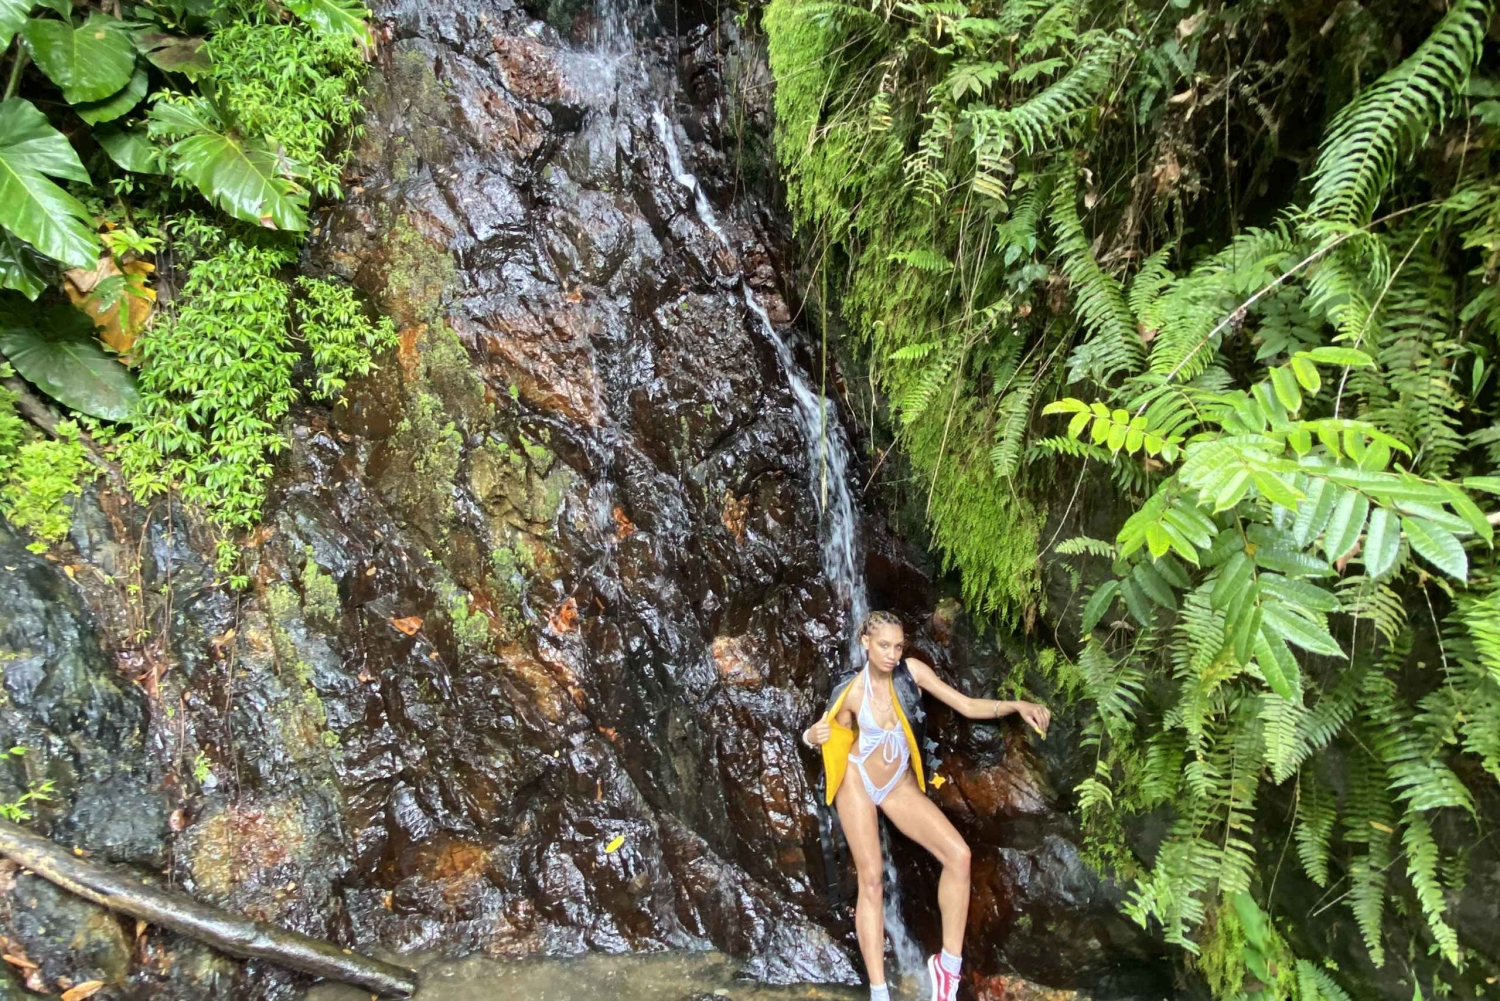 From San Juan: El Yunque Rainforest and Waterslide Tour